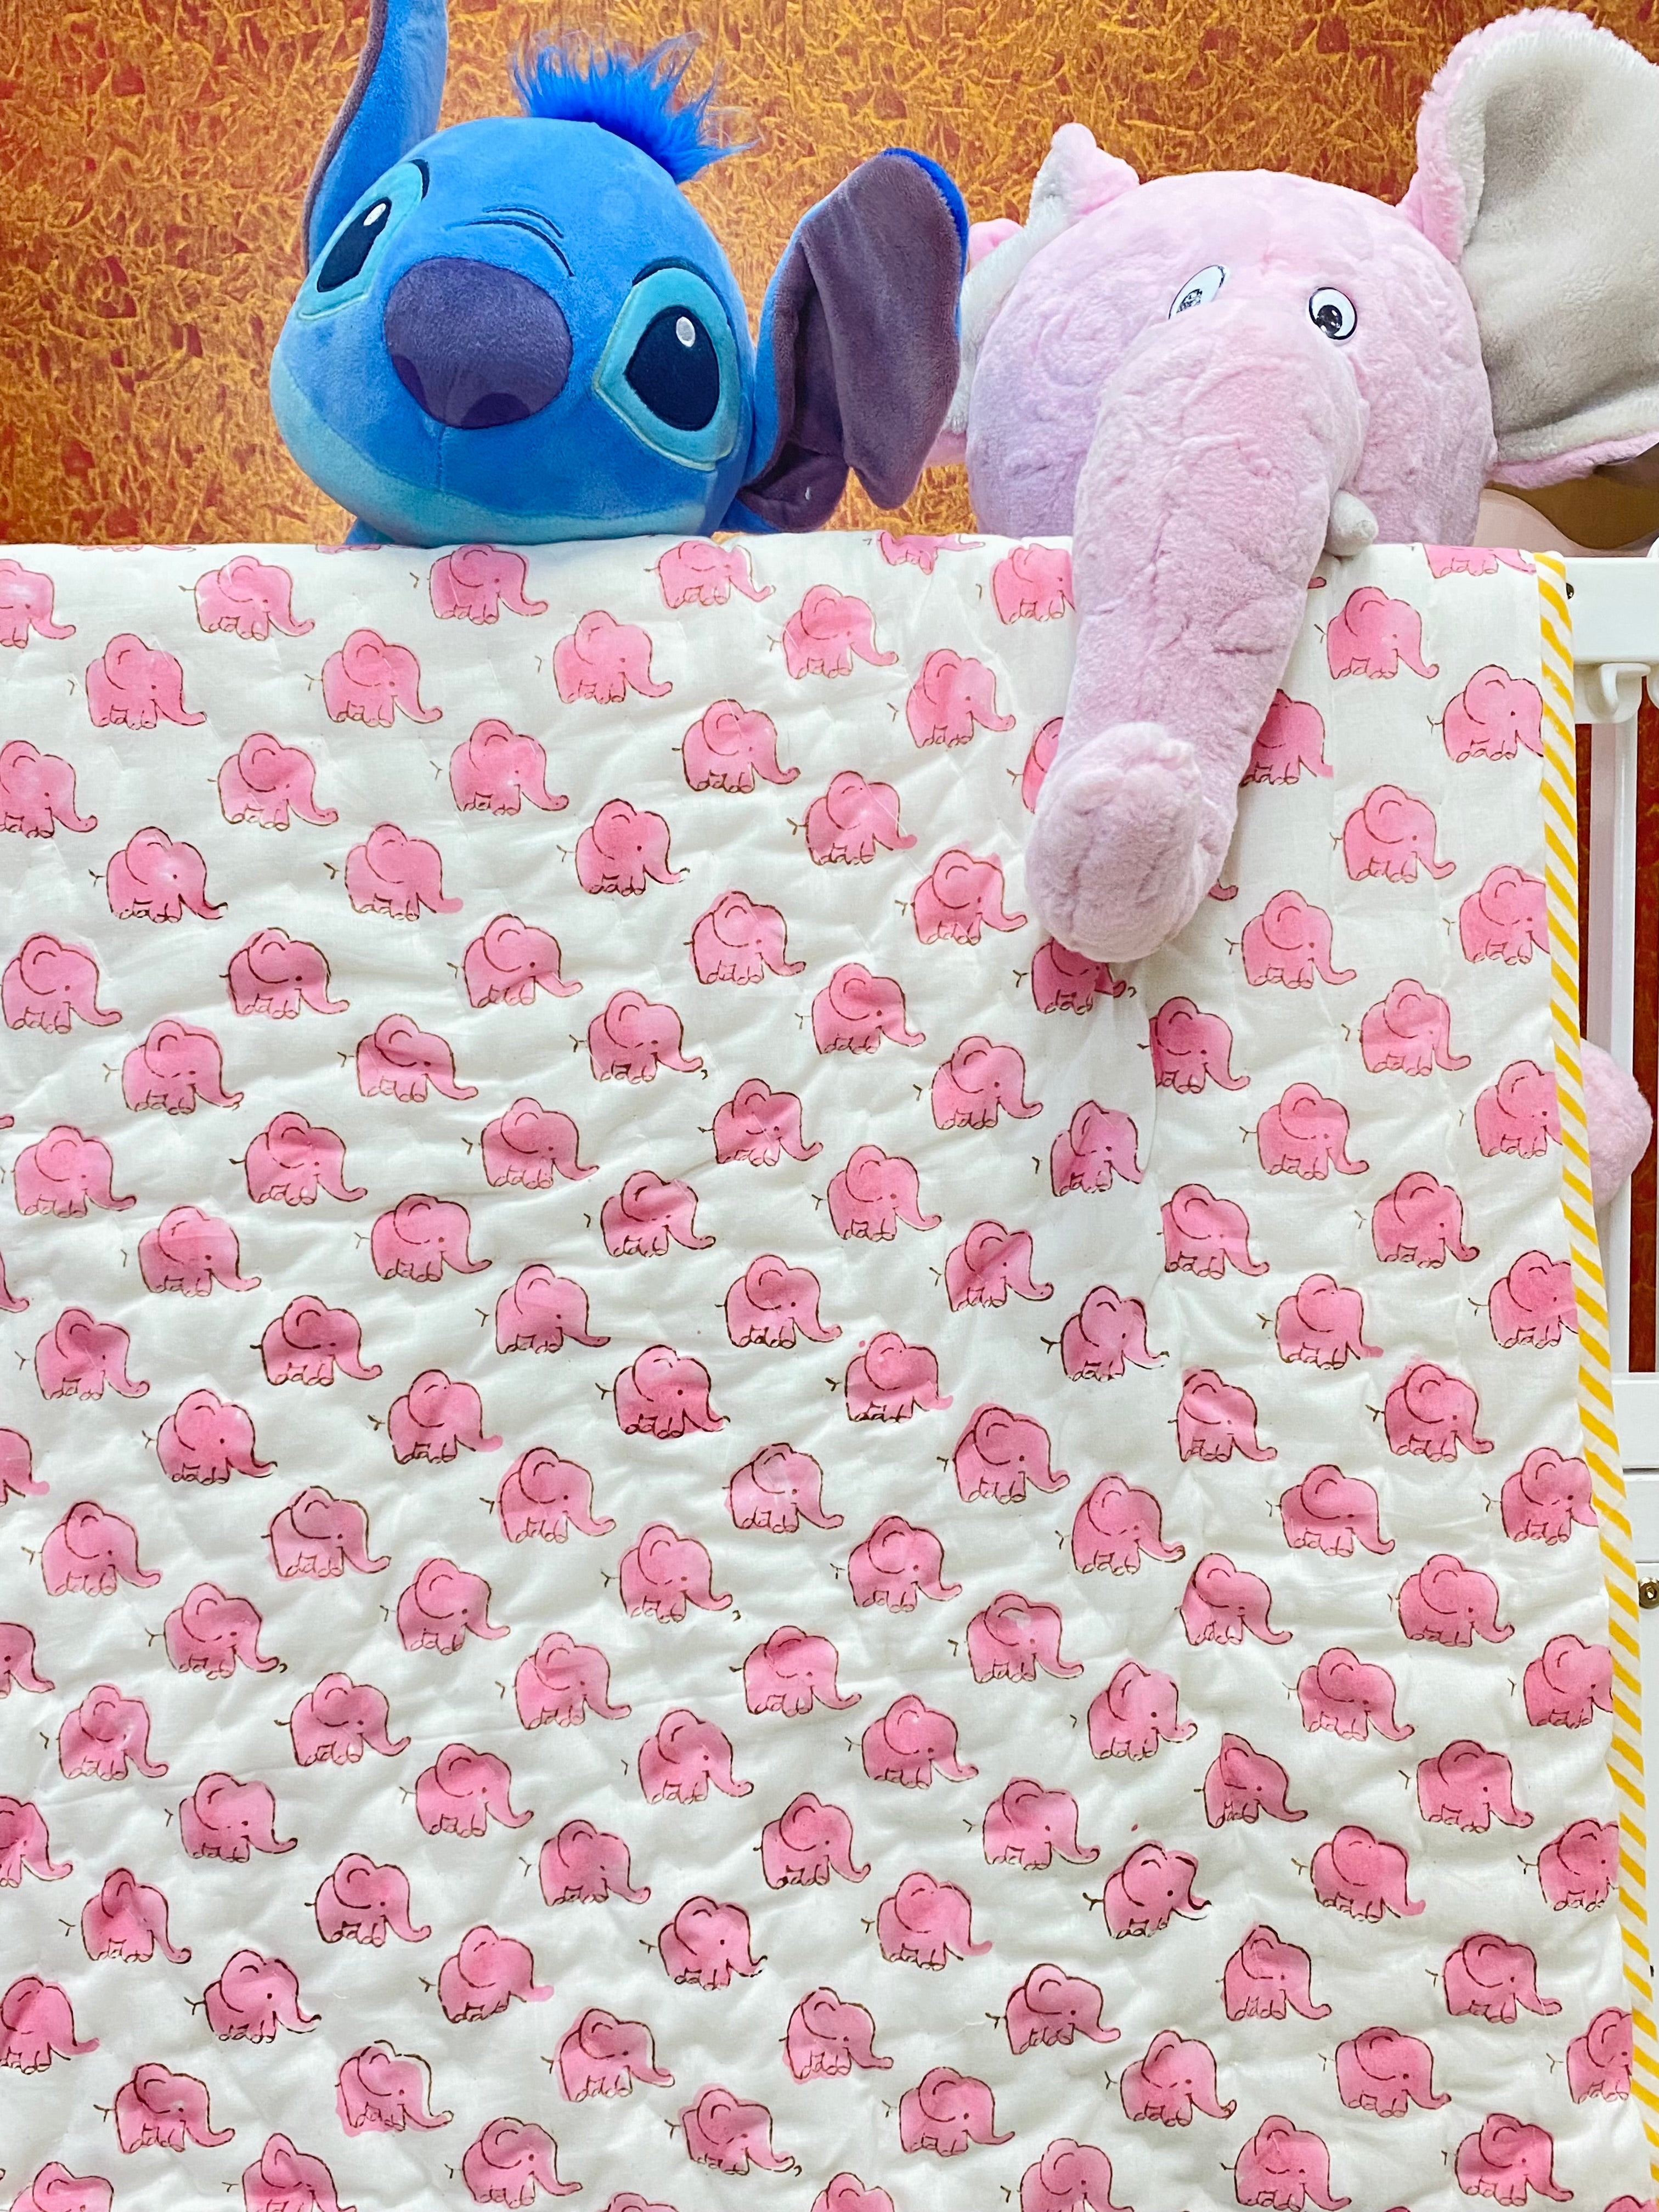 PREORDER Elephant Kids Quilt Handblock Printed- 60*40 inches (10-15 days dispatch time)